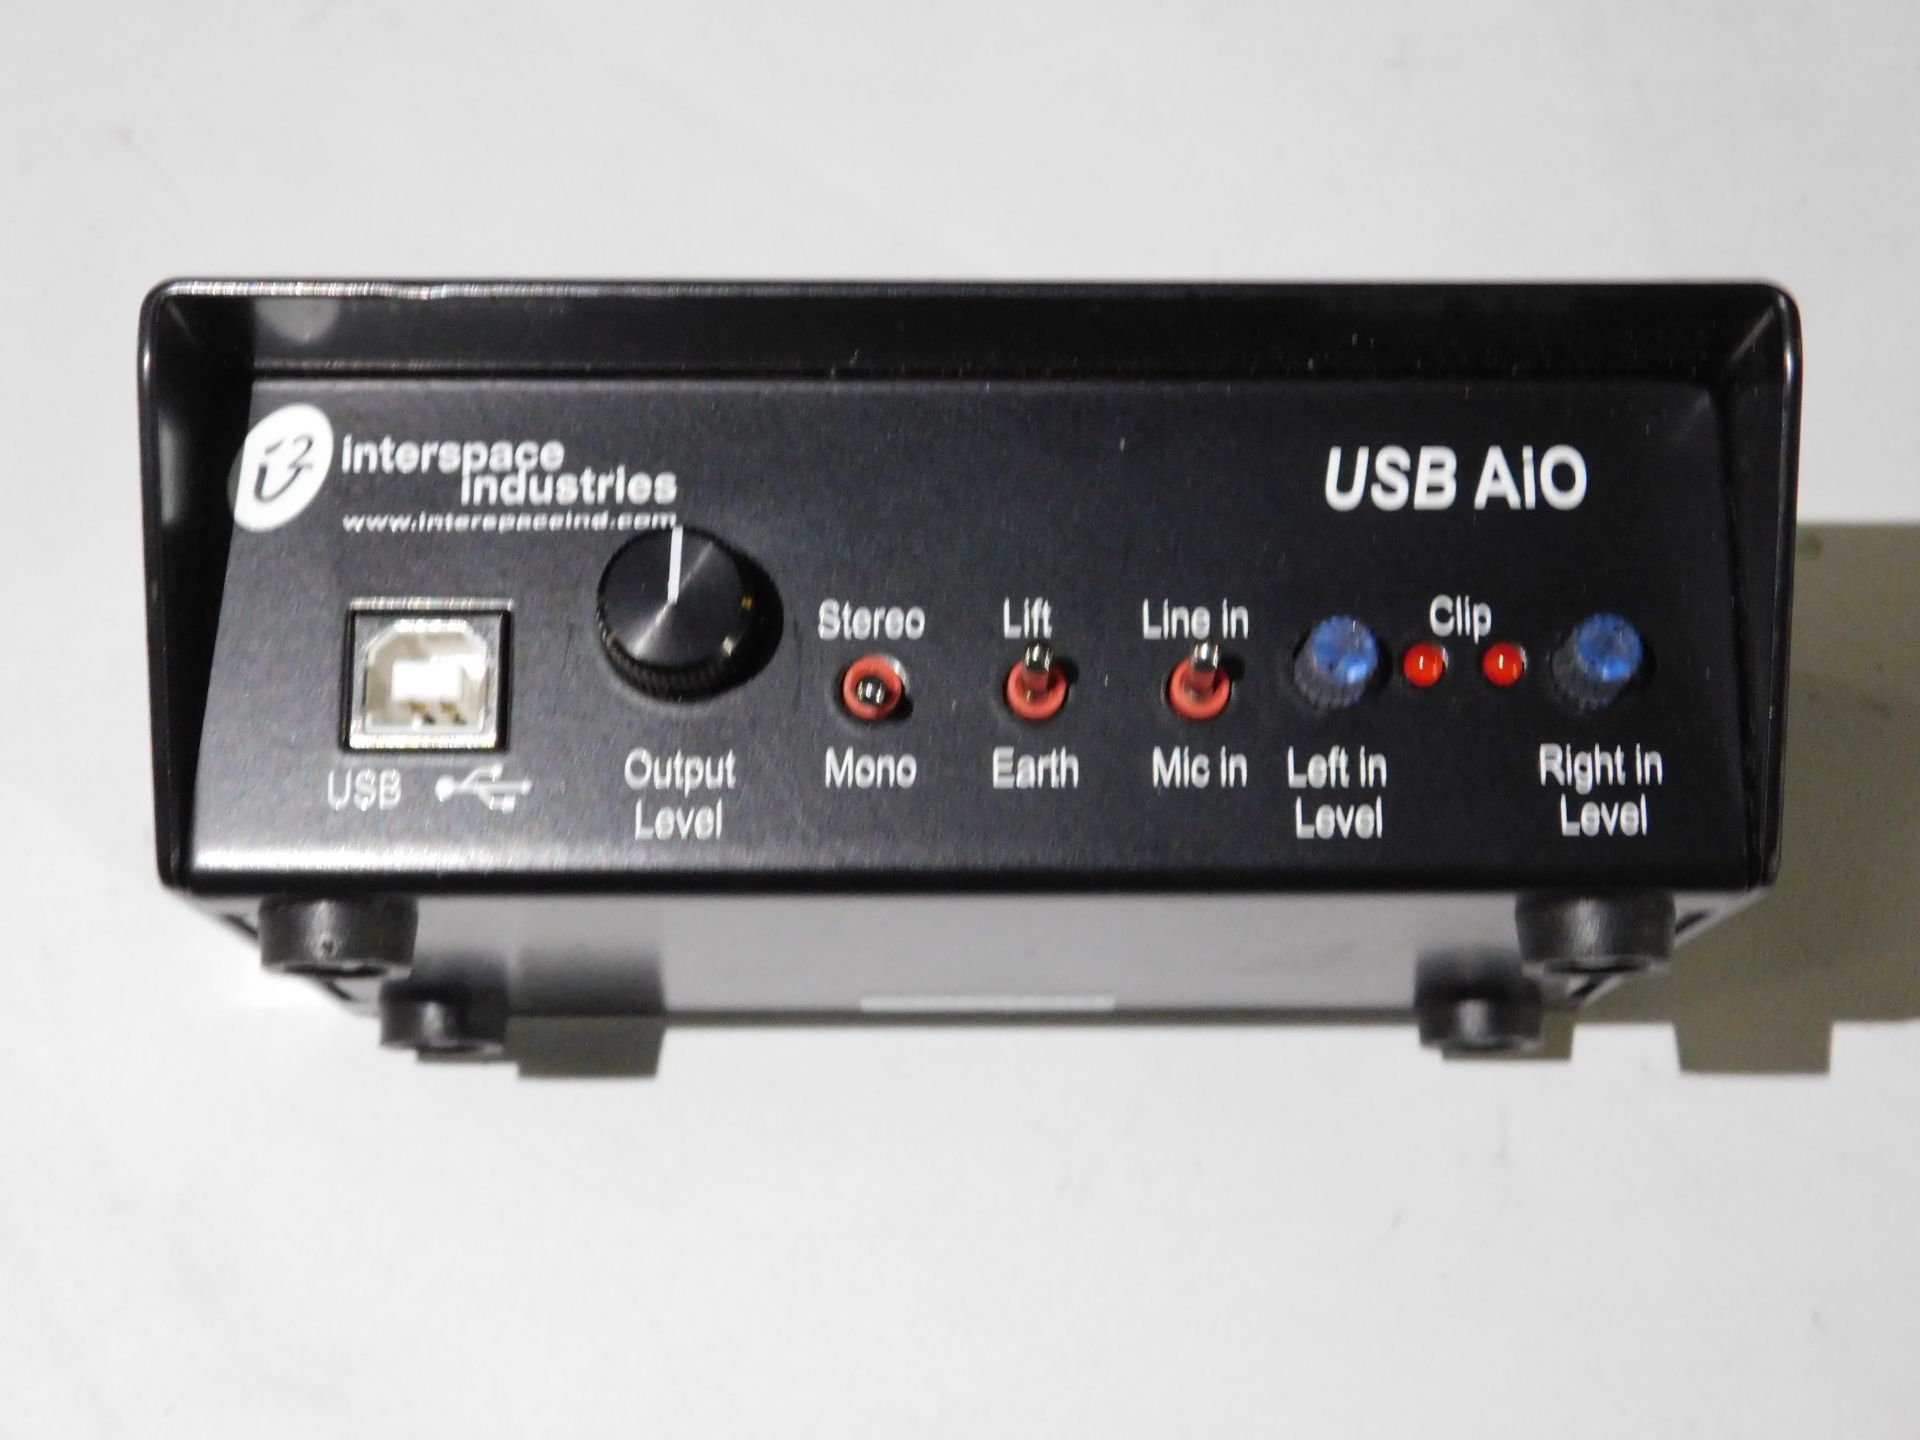 S2H HD-SDI to HDMI Converter; Avolites USB to S PIN DMX Controller; VDC AiO USB Audio In/Out - Image 13 of 14